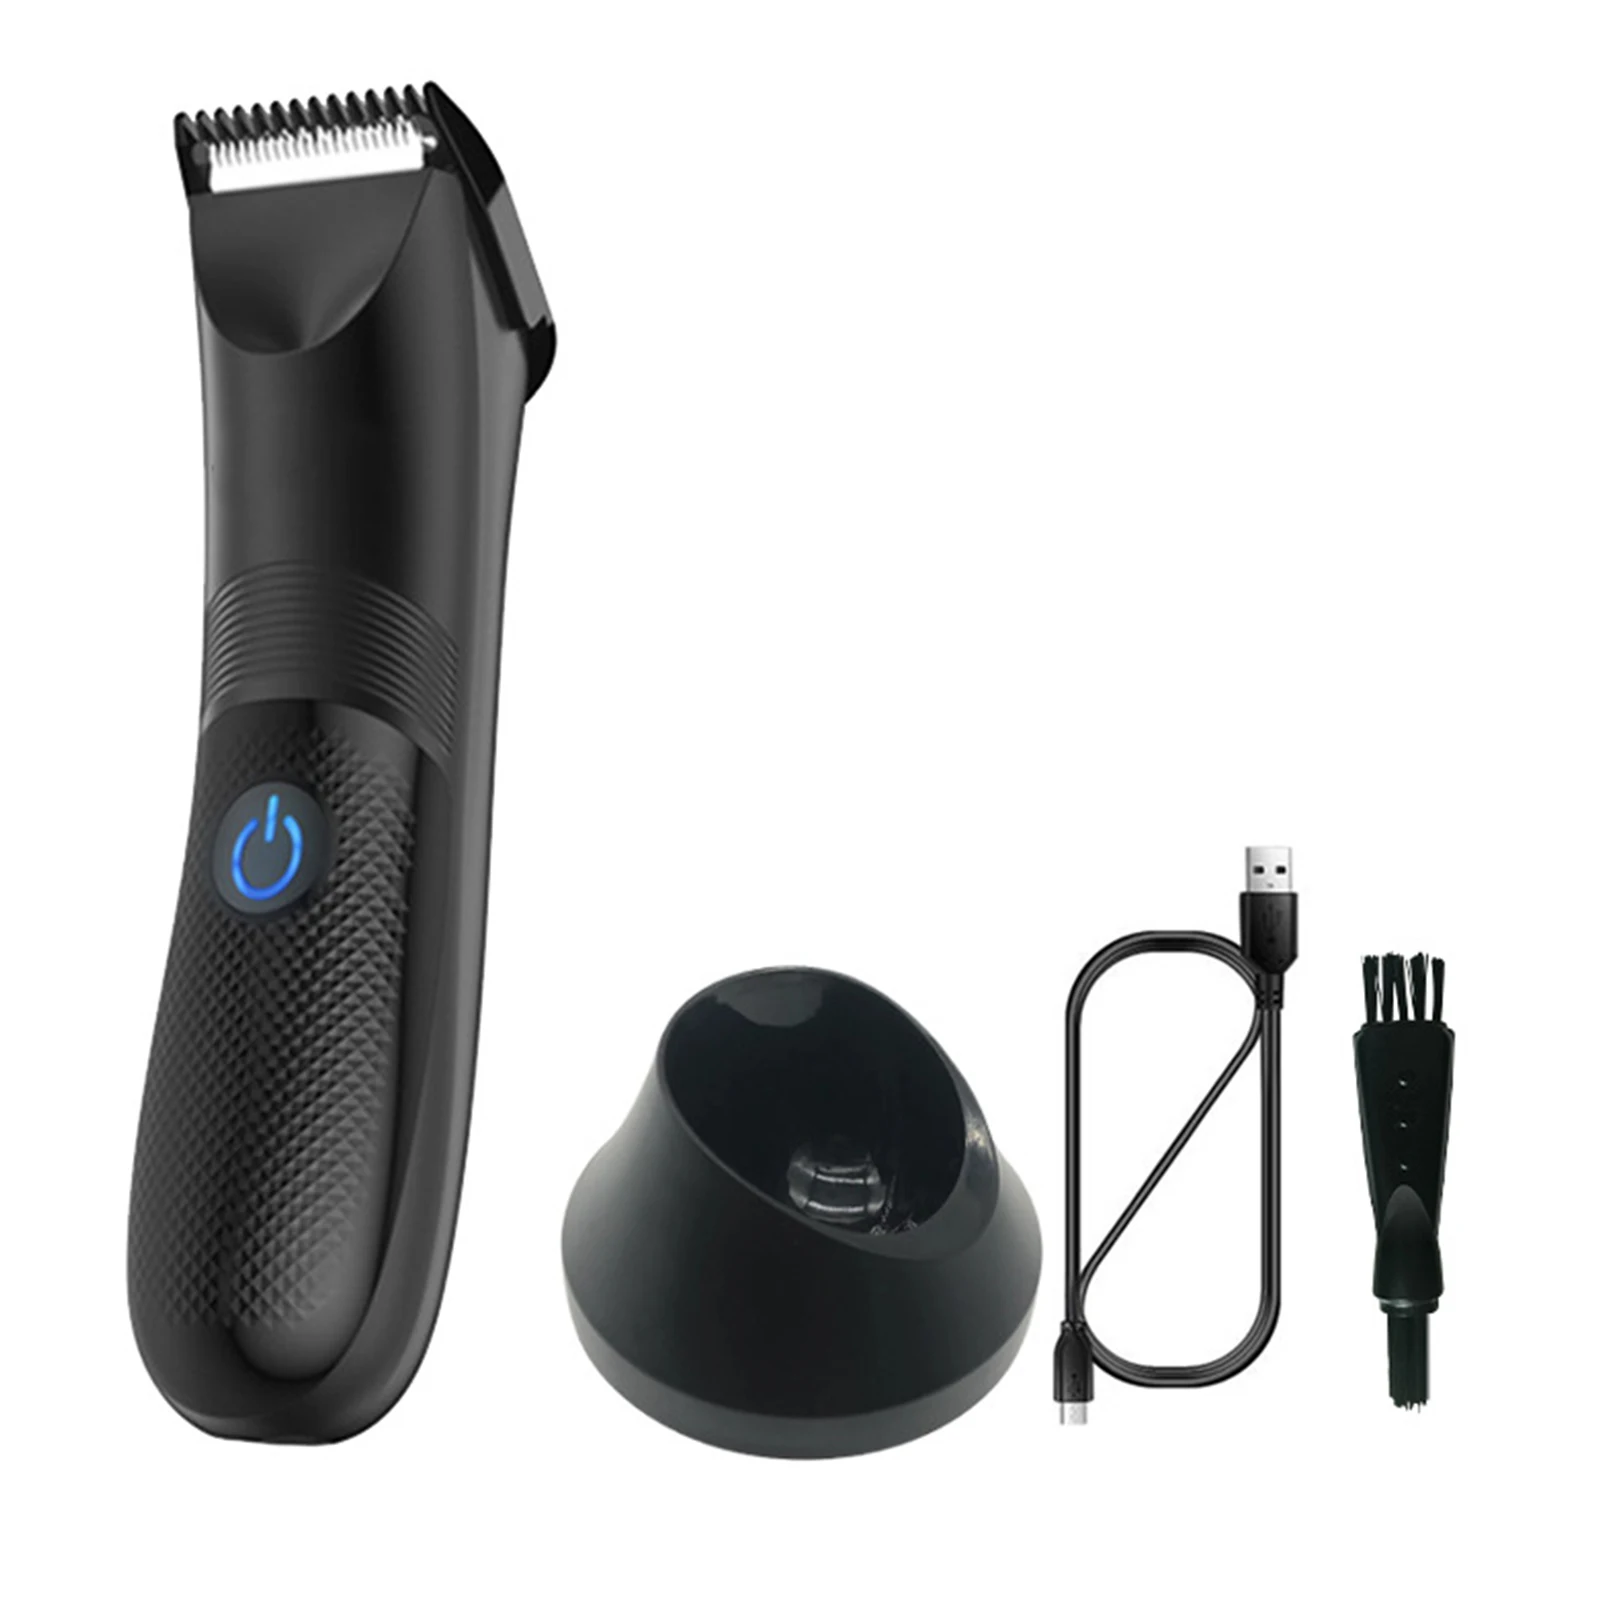 

USB Rechargeable Grooming IPX7 Waterproof Electric Shaver With LED Light Groin Beard Pubic Hair Chest Legs Men Body Trimmer